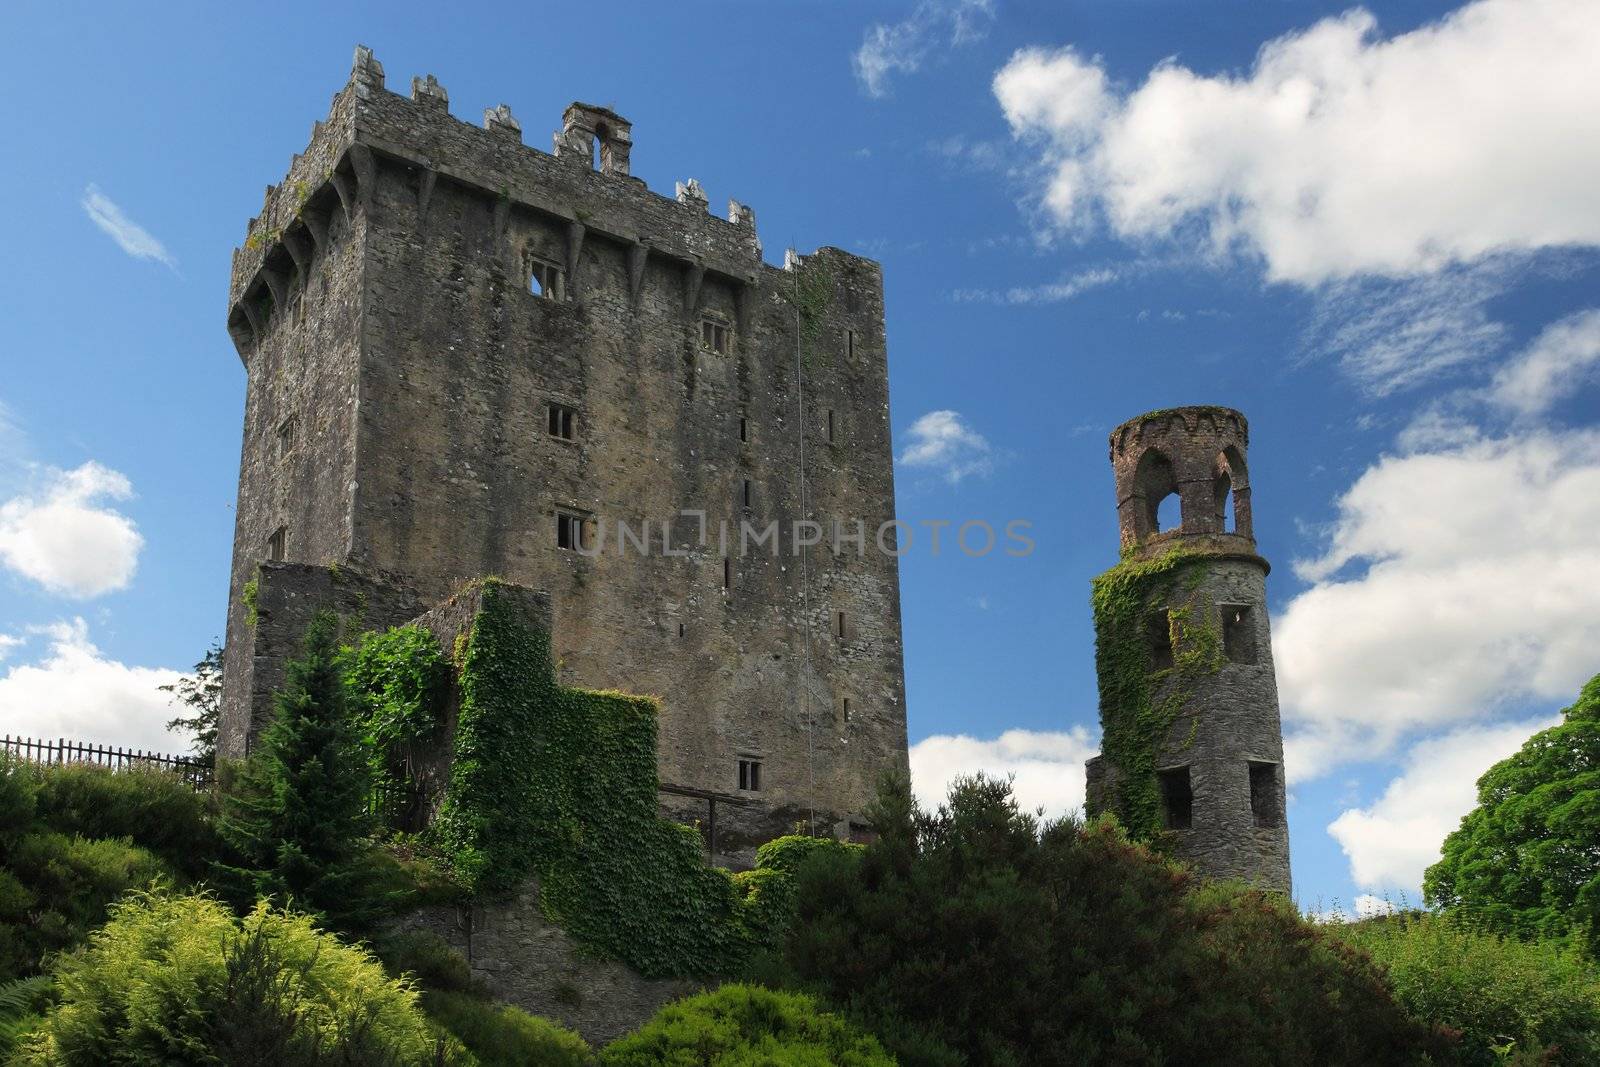 Blarney Castle of Ireland - famous for the Kiss the Blarney Stone tale.
